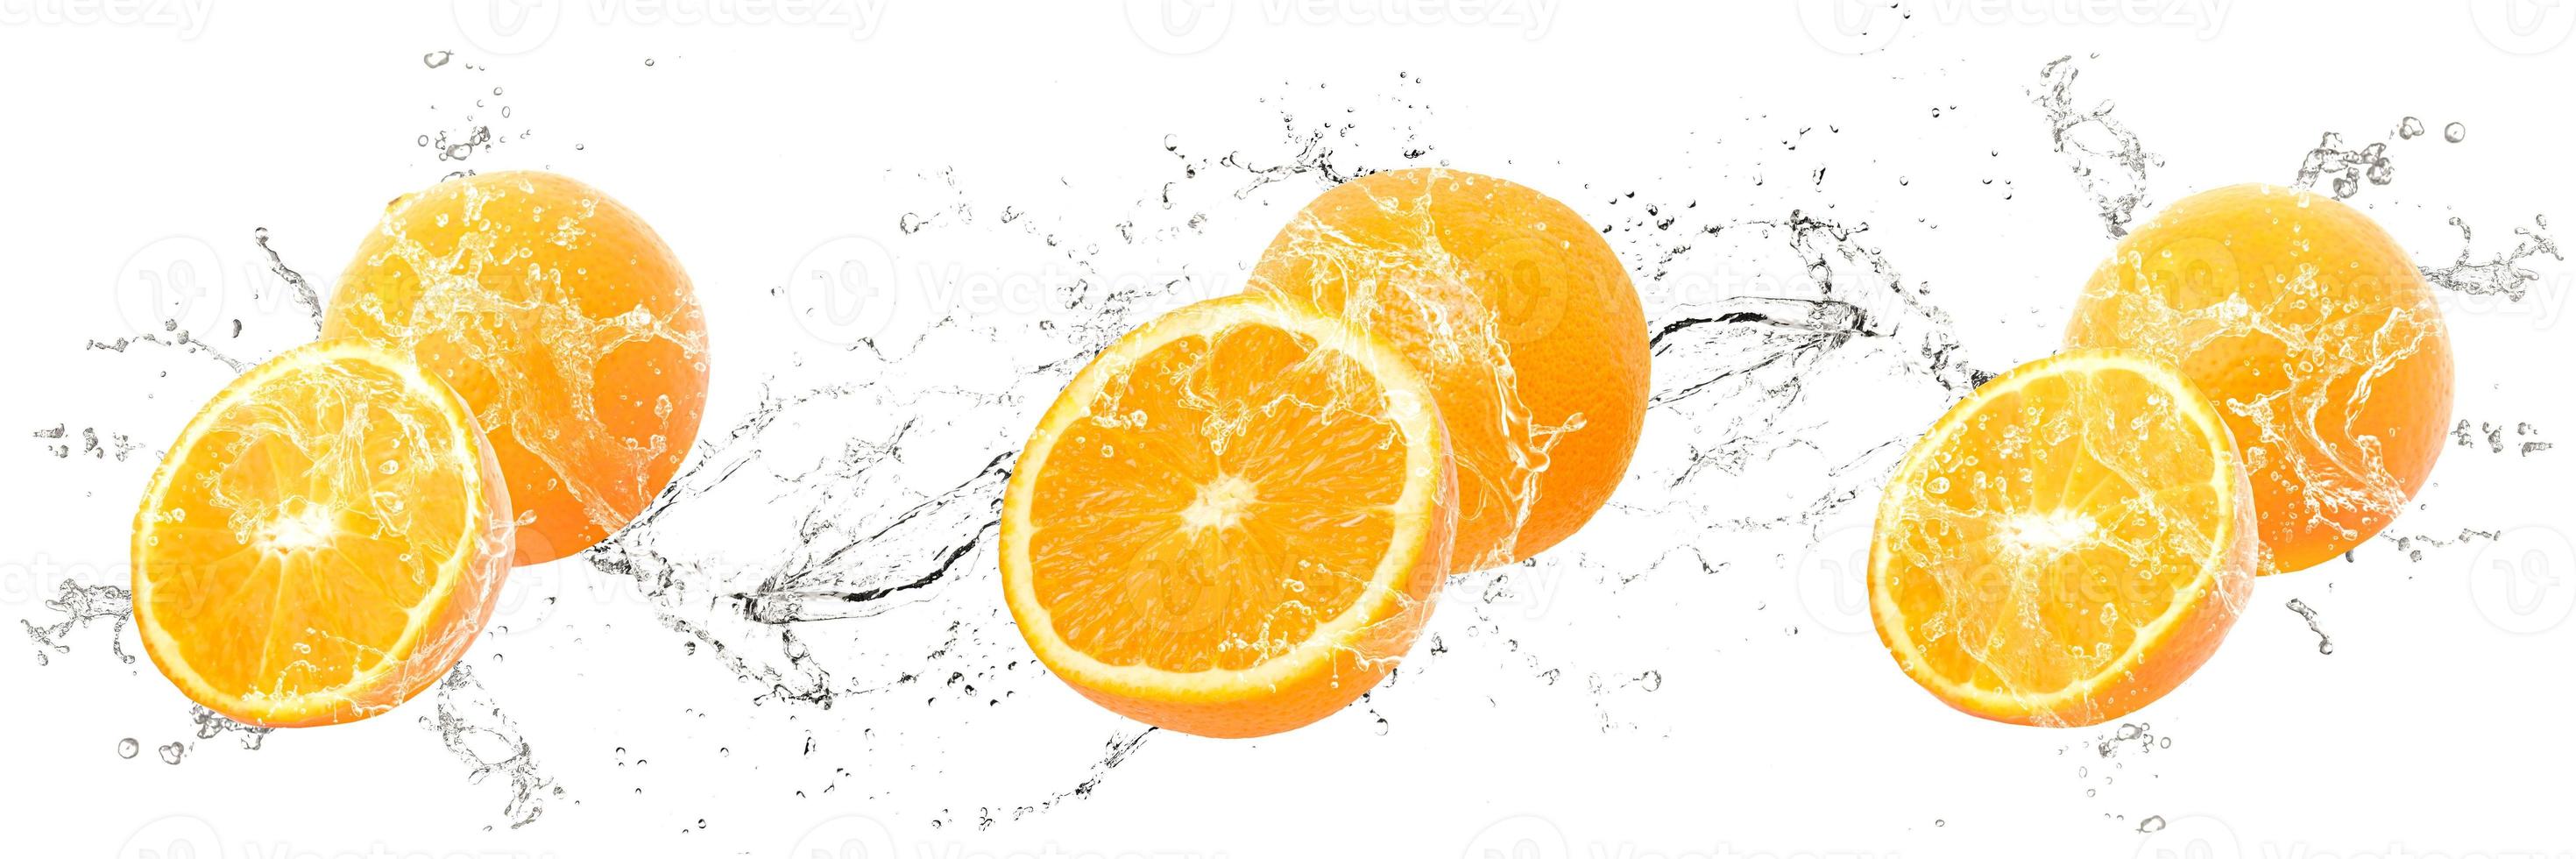 Fresh Oranges and slices with water splash and drops on isolated white background, Citrus Fruit Renders photo